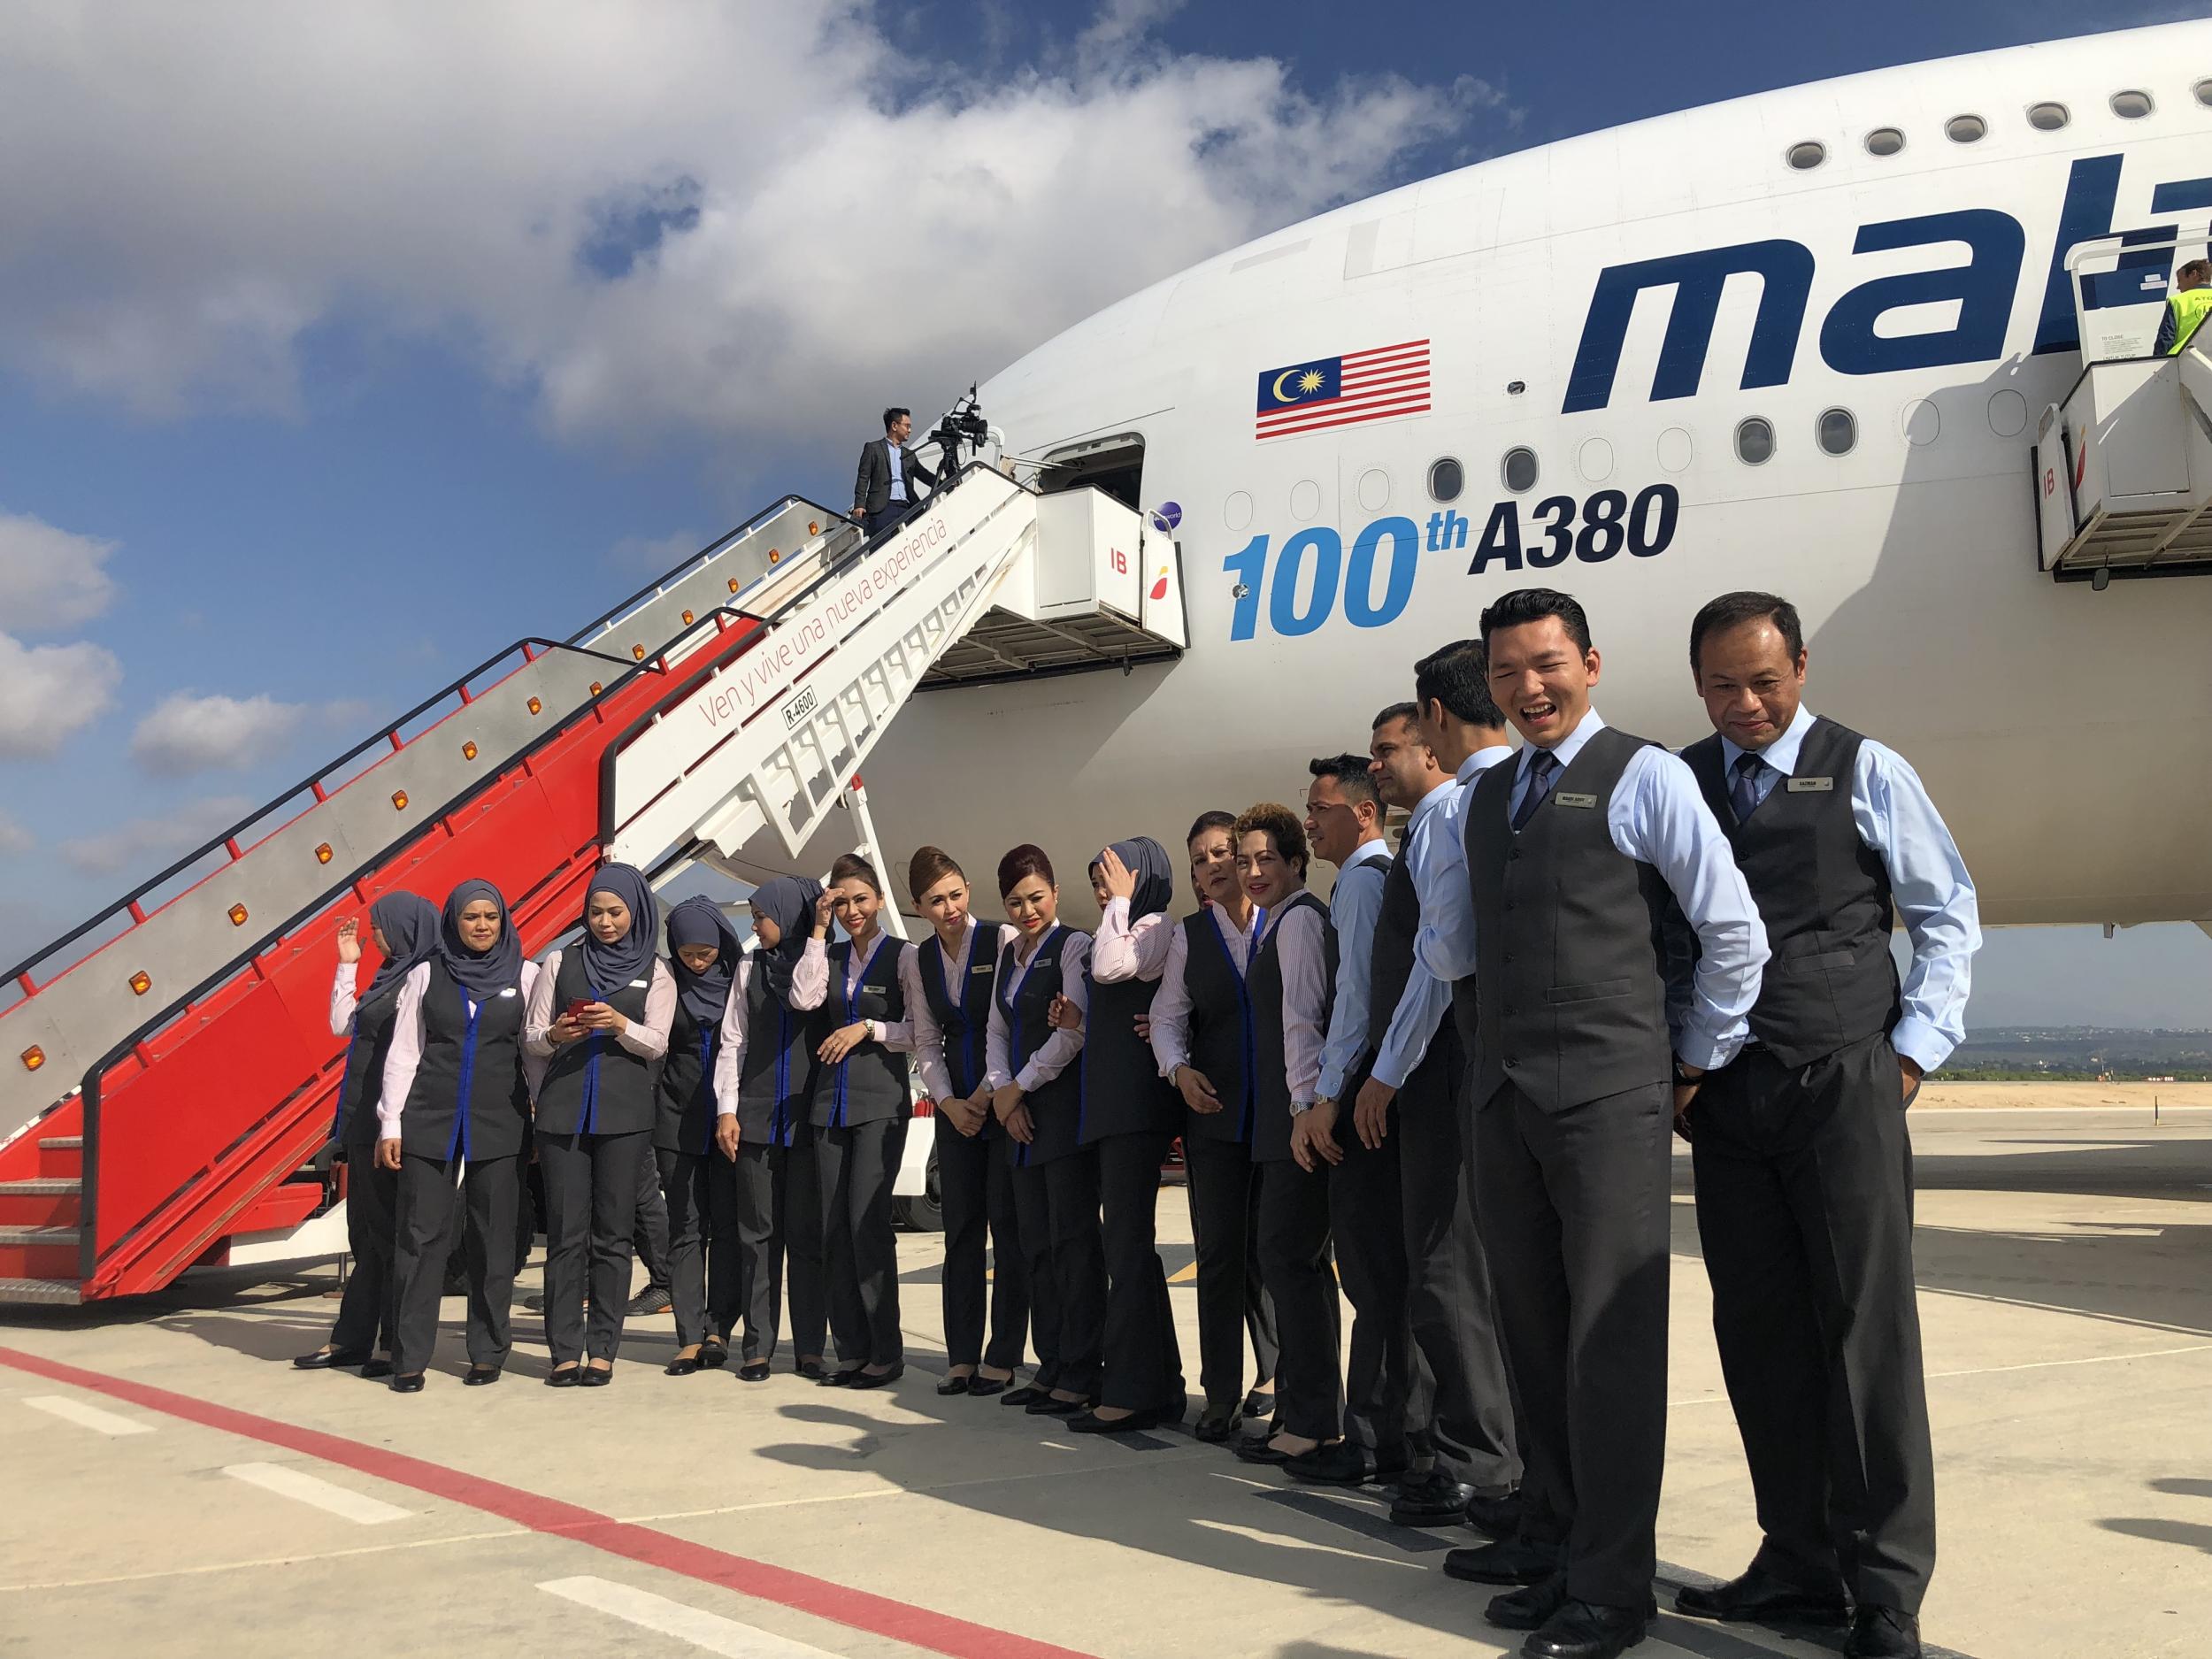 Welcome aboard: Malaysia Airlines cabin crew at Palma airport, waiting for passengers to board a ‘rescue flight’ to Manchester